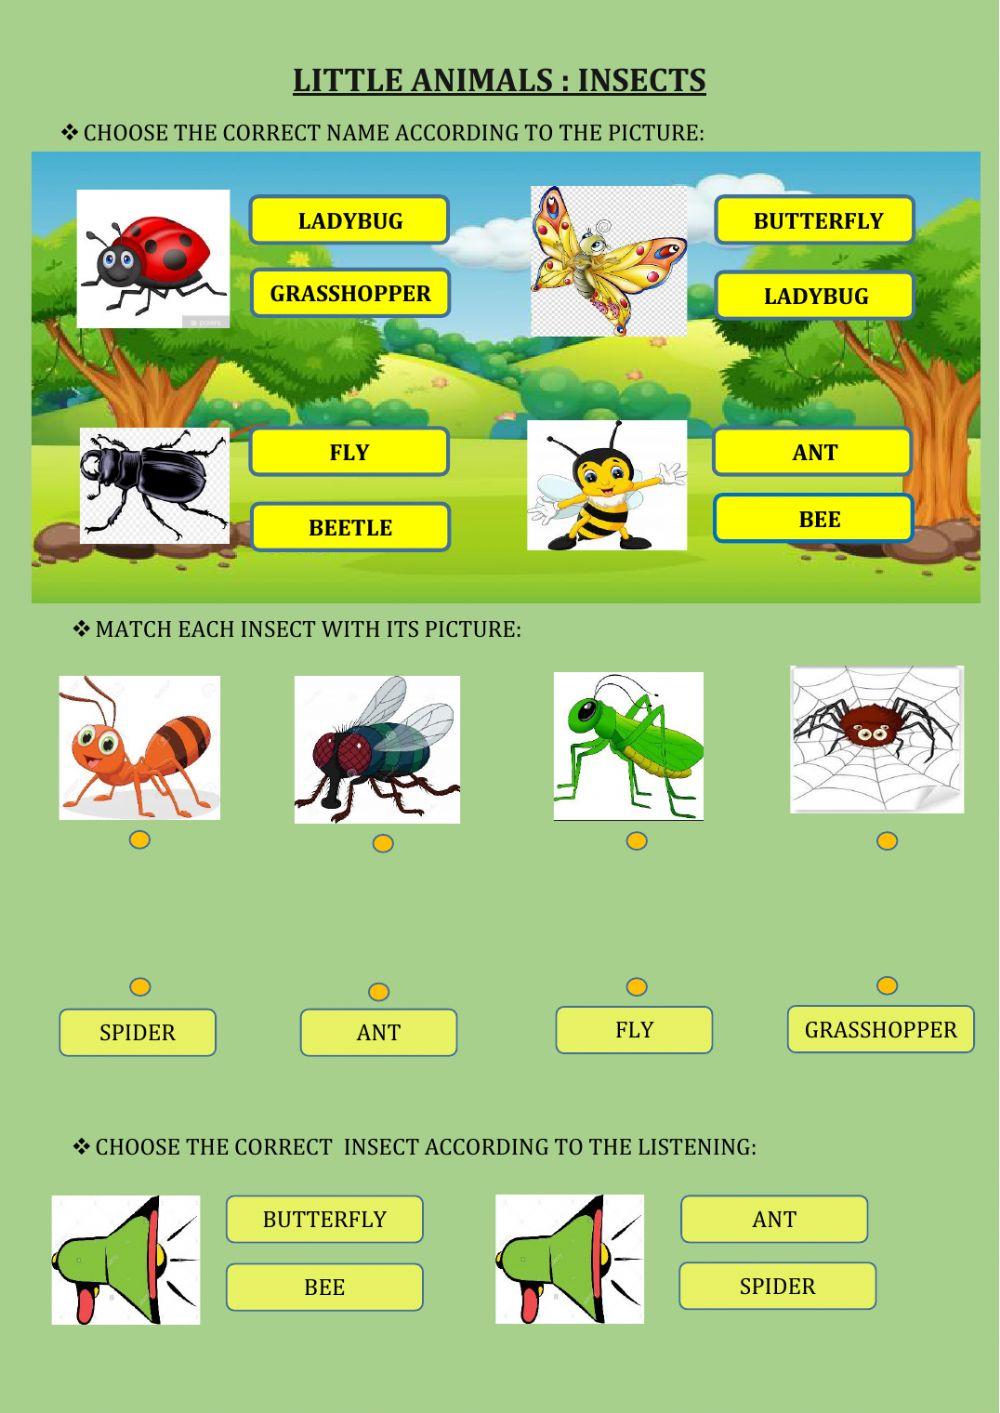 Little animals (insects)